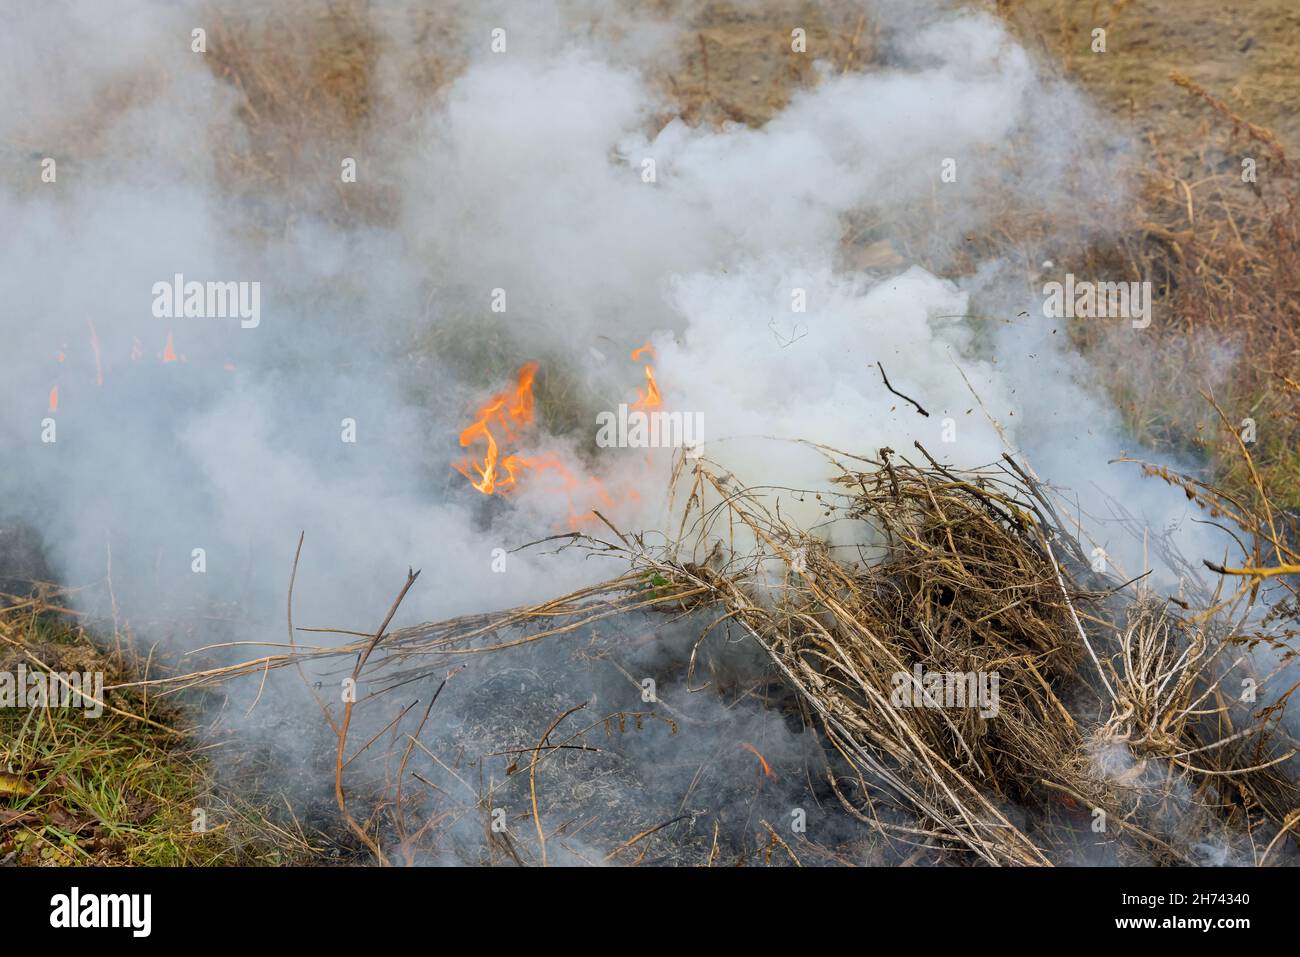 A spring fire the dry grass is burning much smoke Stock Photo